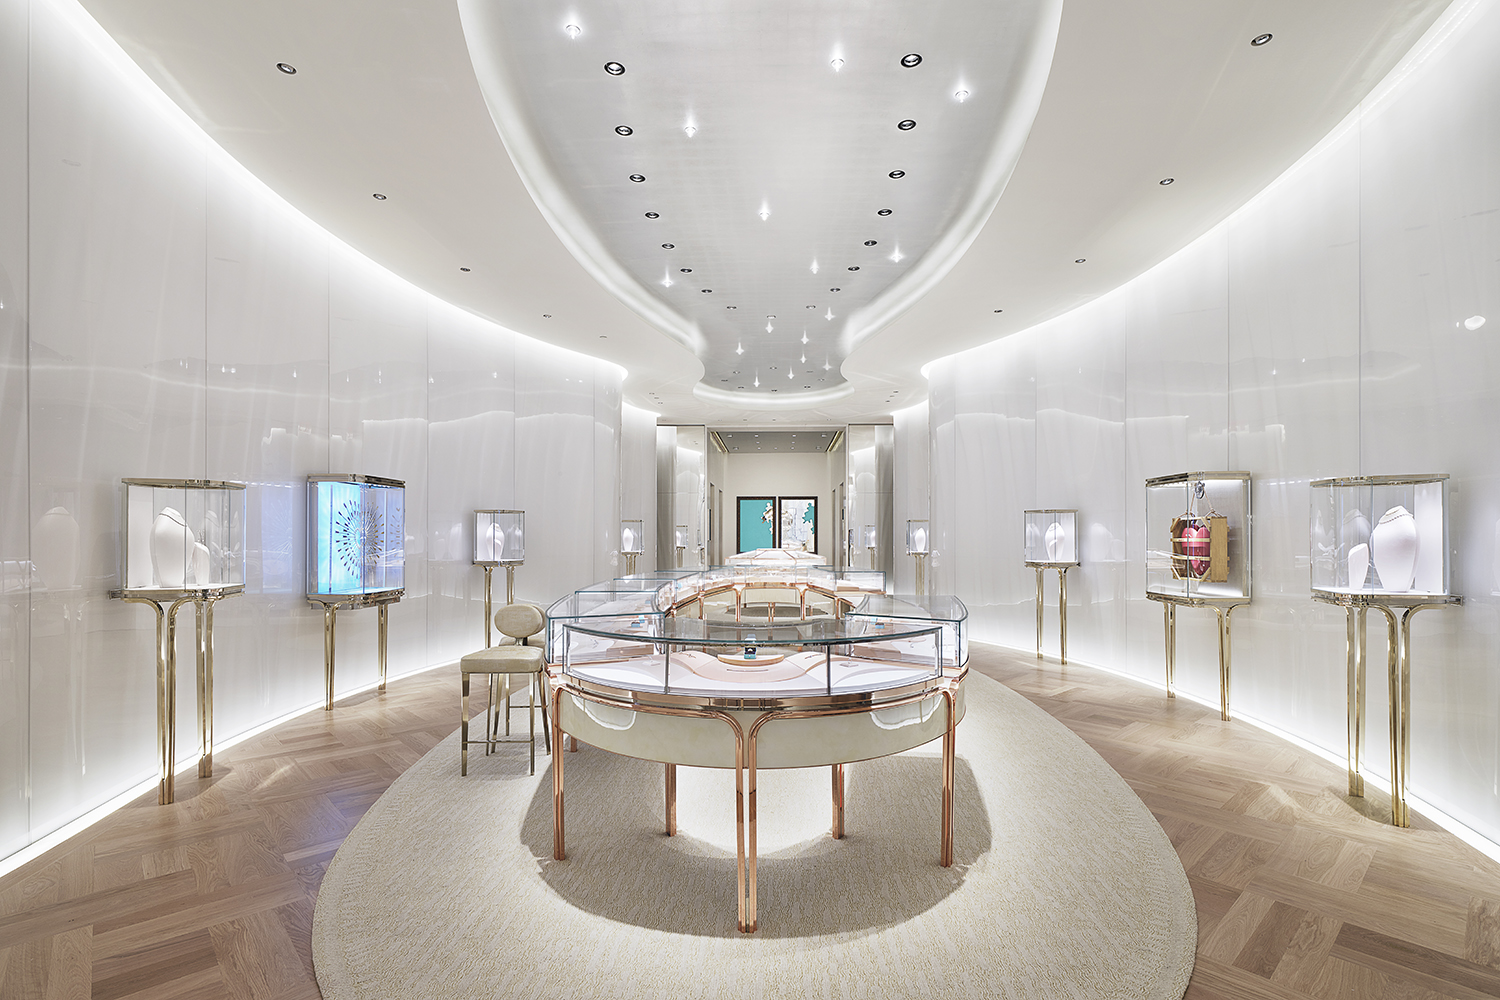 I Got a Tour of the New Tiffany Store From the Star Architect, Peter Marino,  Himself